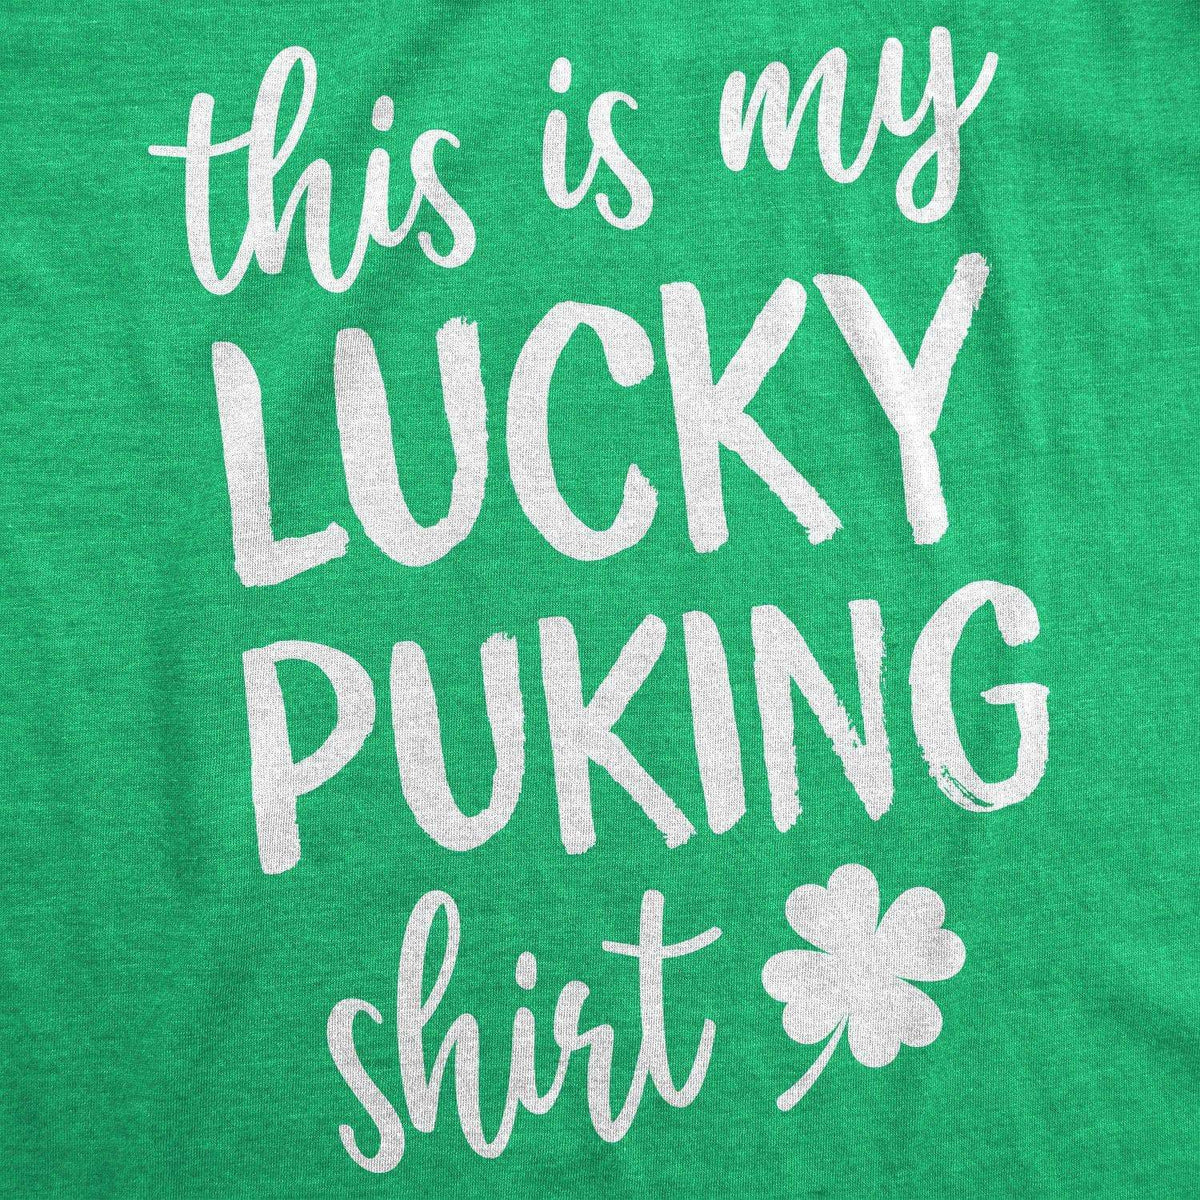 This Is My Lucky Puking Shirt Women&#39;s Tshirt - Crazy Dog T-Shirts